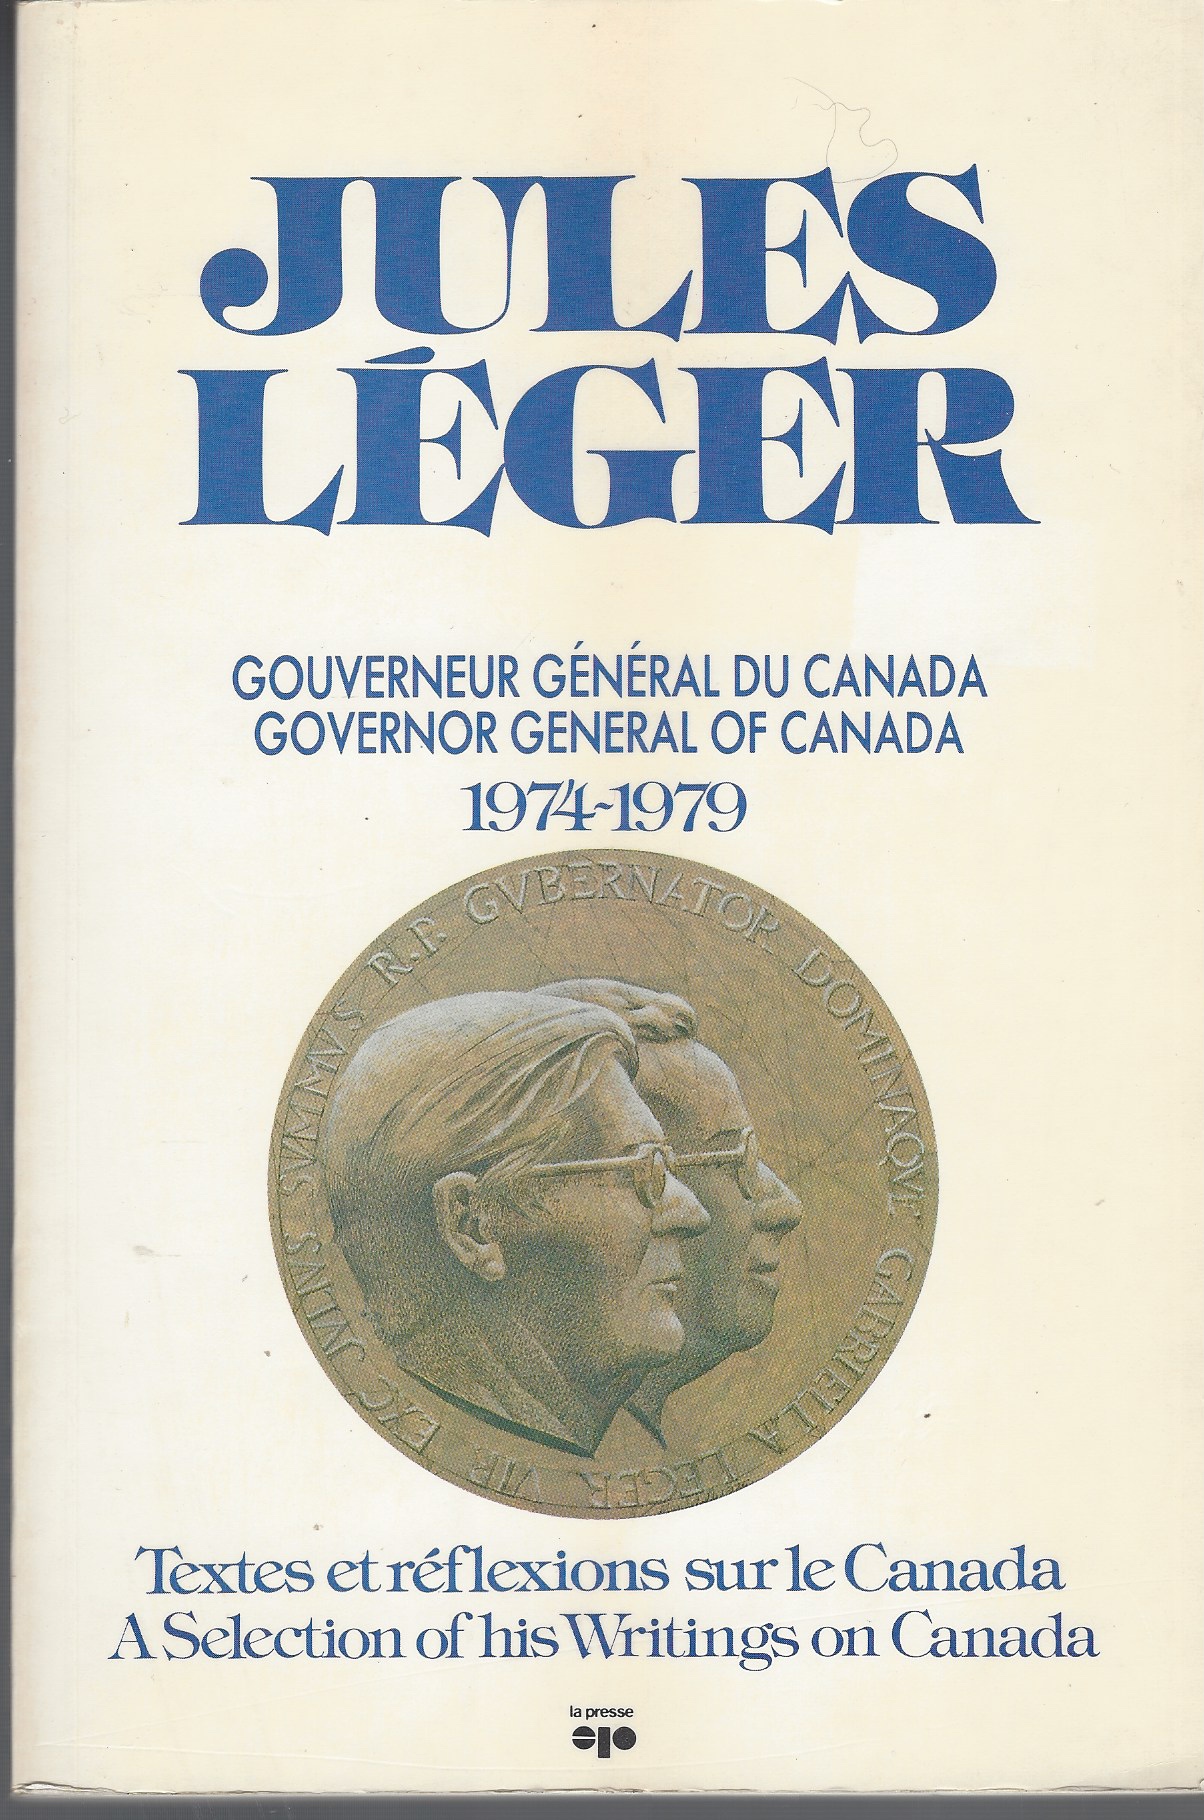 LEGER JULES - Jules Leger: Gouverneur General Du Canada, 1974-1979 : Textes Et Reflexions Sur le Canada = Jules Leger : Governor General of Canada, 1974-1979 : A Selection of His Writings on Canada